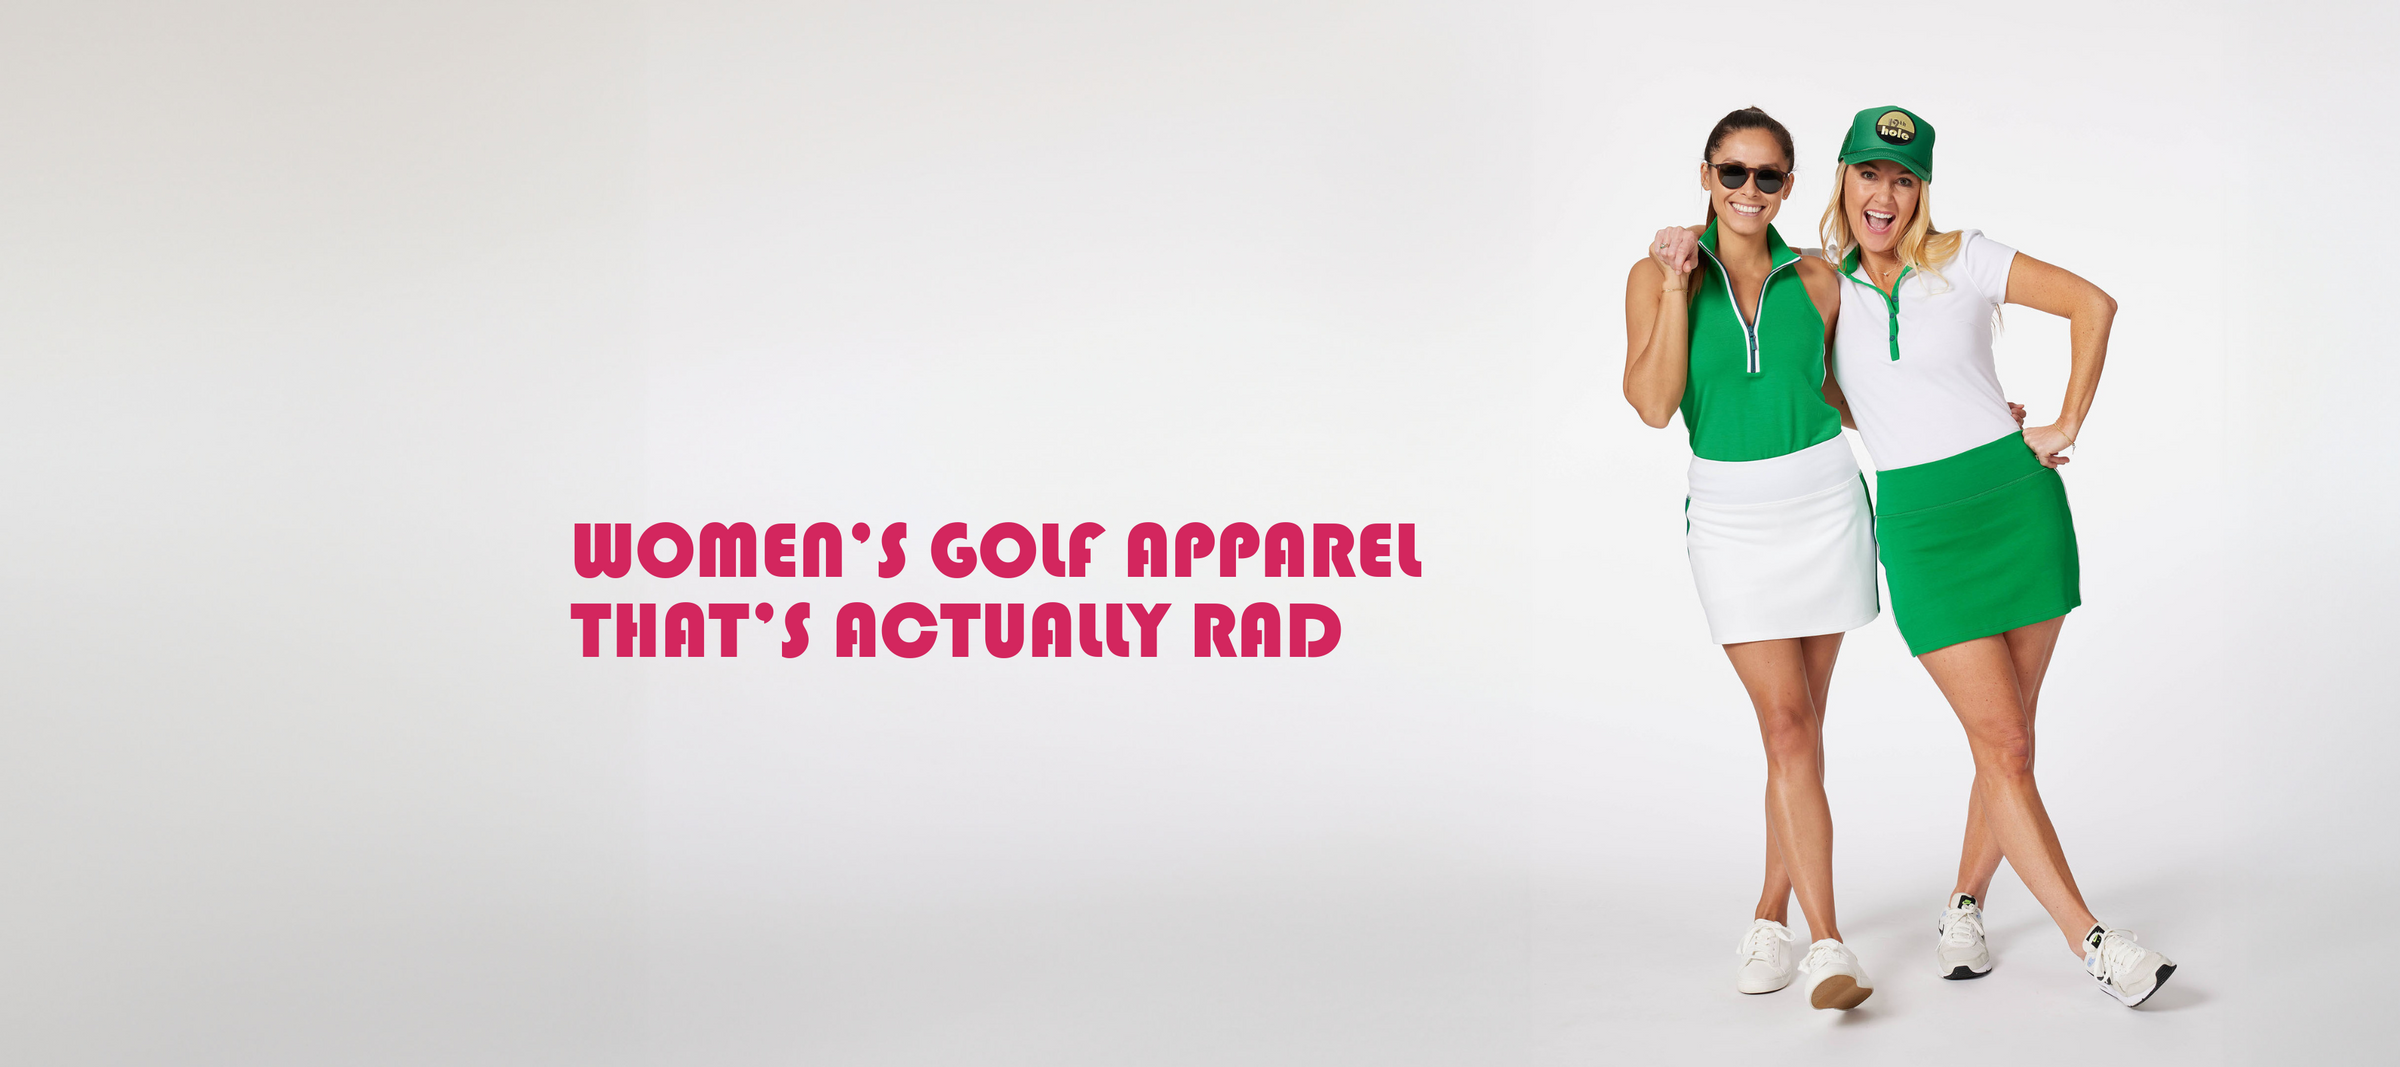 Pirdie - Womens Golf Apparel That's Actually Rad